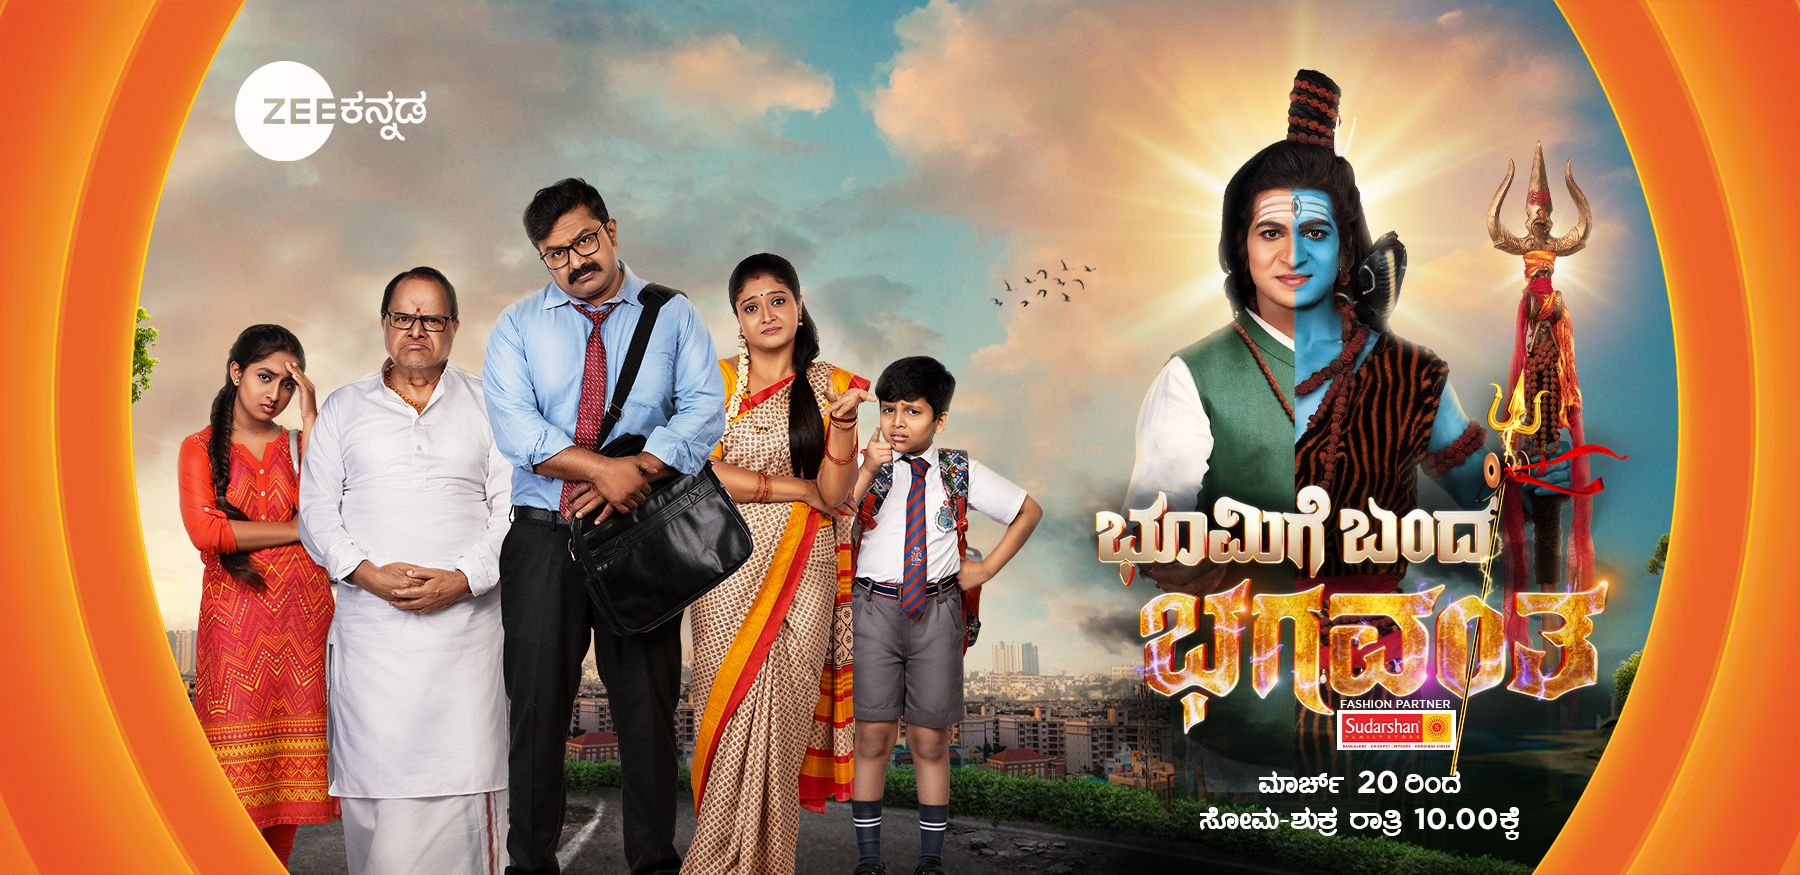 Hitler Kalyana Serial Opened With 7.9 TVR** - No.1 Kannada Show of Week 32 20